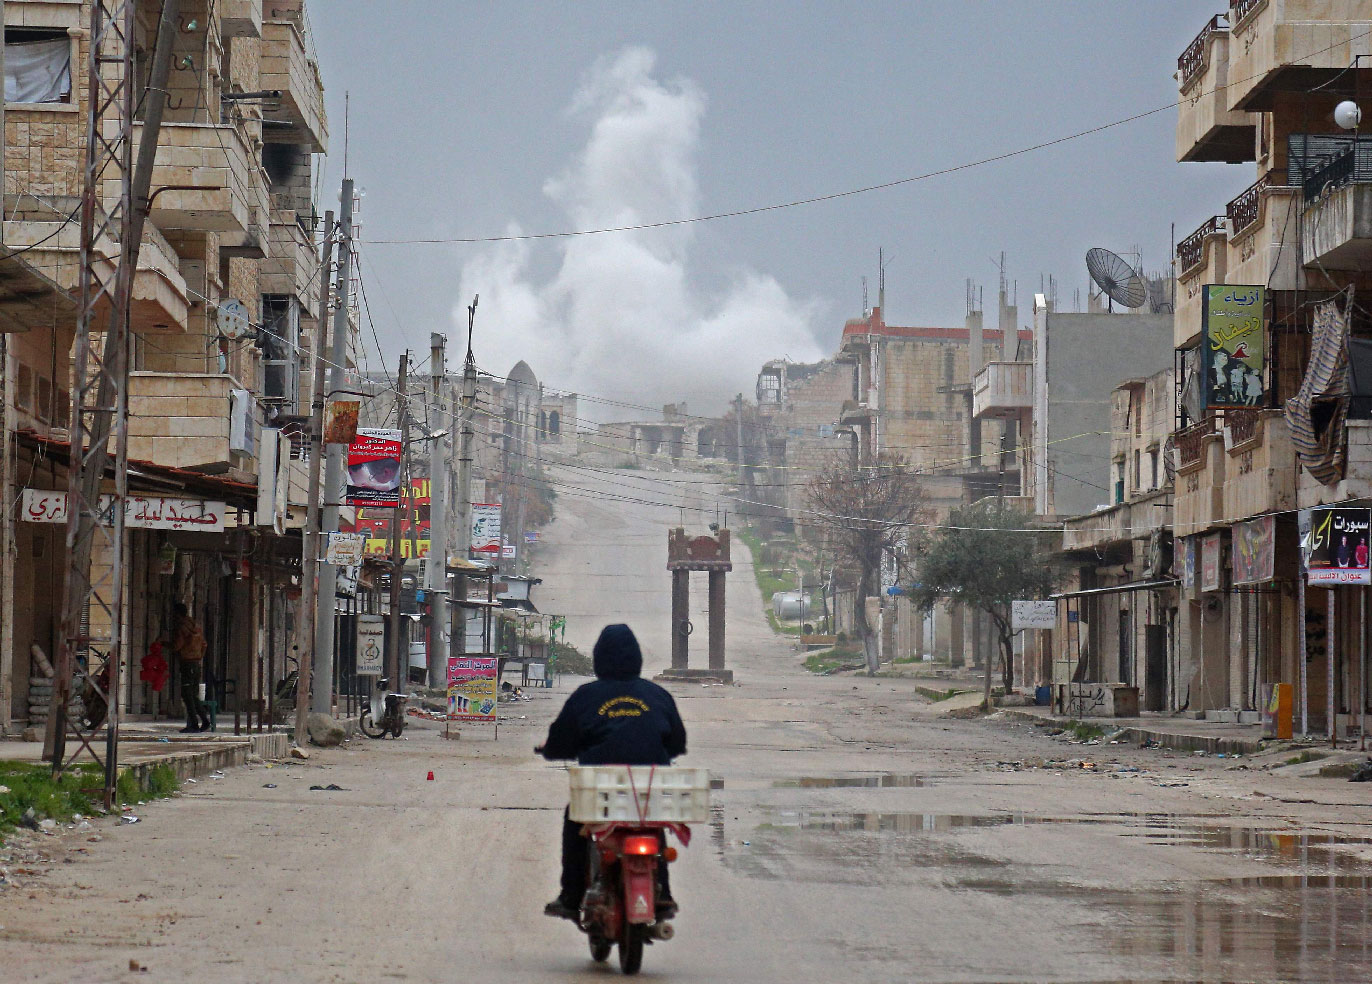 A man rides a scooter on a street during reported air strikes in the town of Khan Sheikhun in the southern countryside of the rebel-held Idlib province, on February 22, 2019.